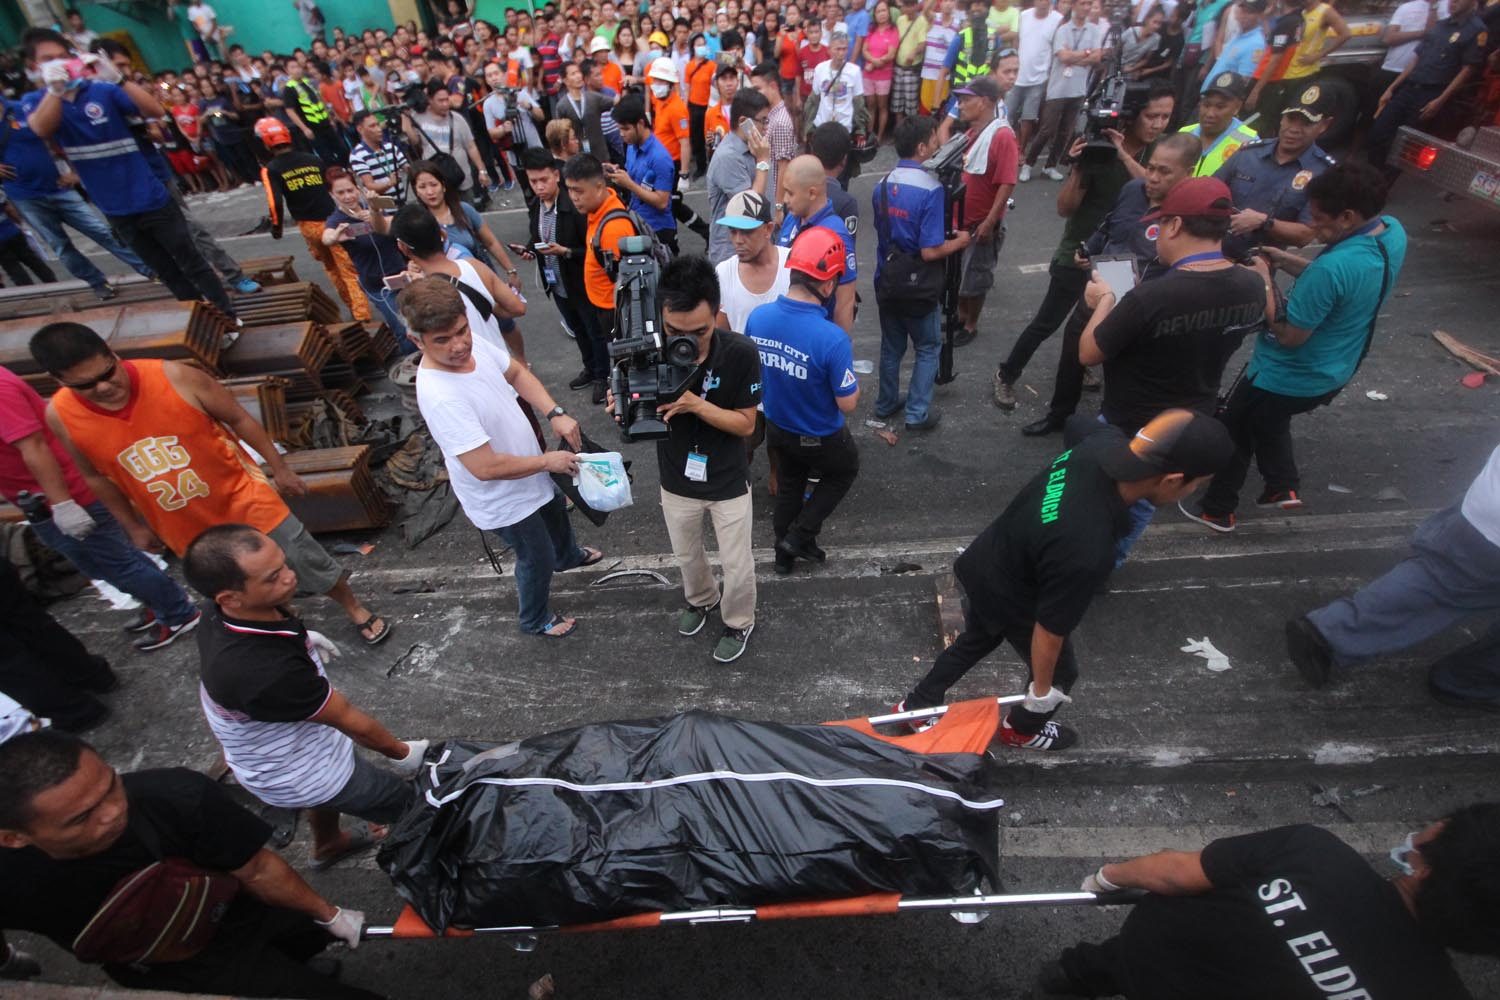 CASUALTIES. At least 4 people were killed from the incident. Photo by DARREN LANGIT 